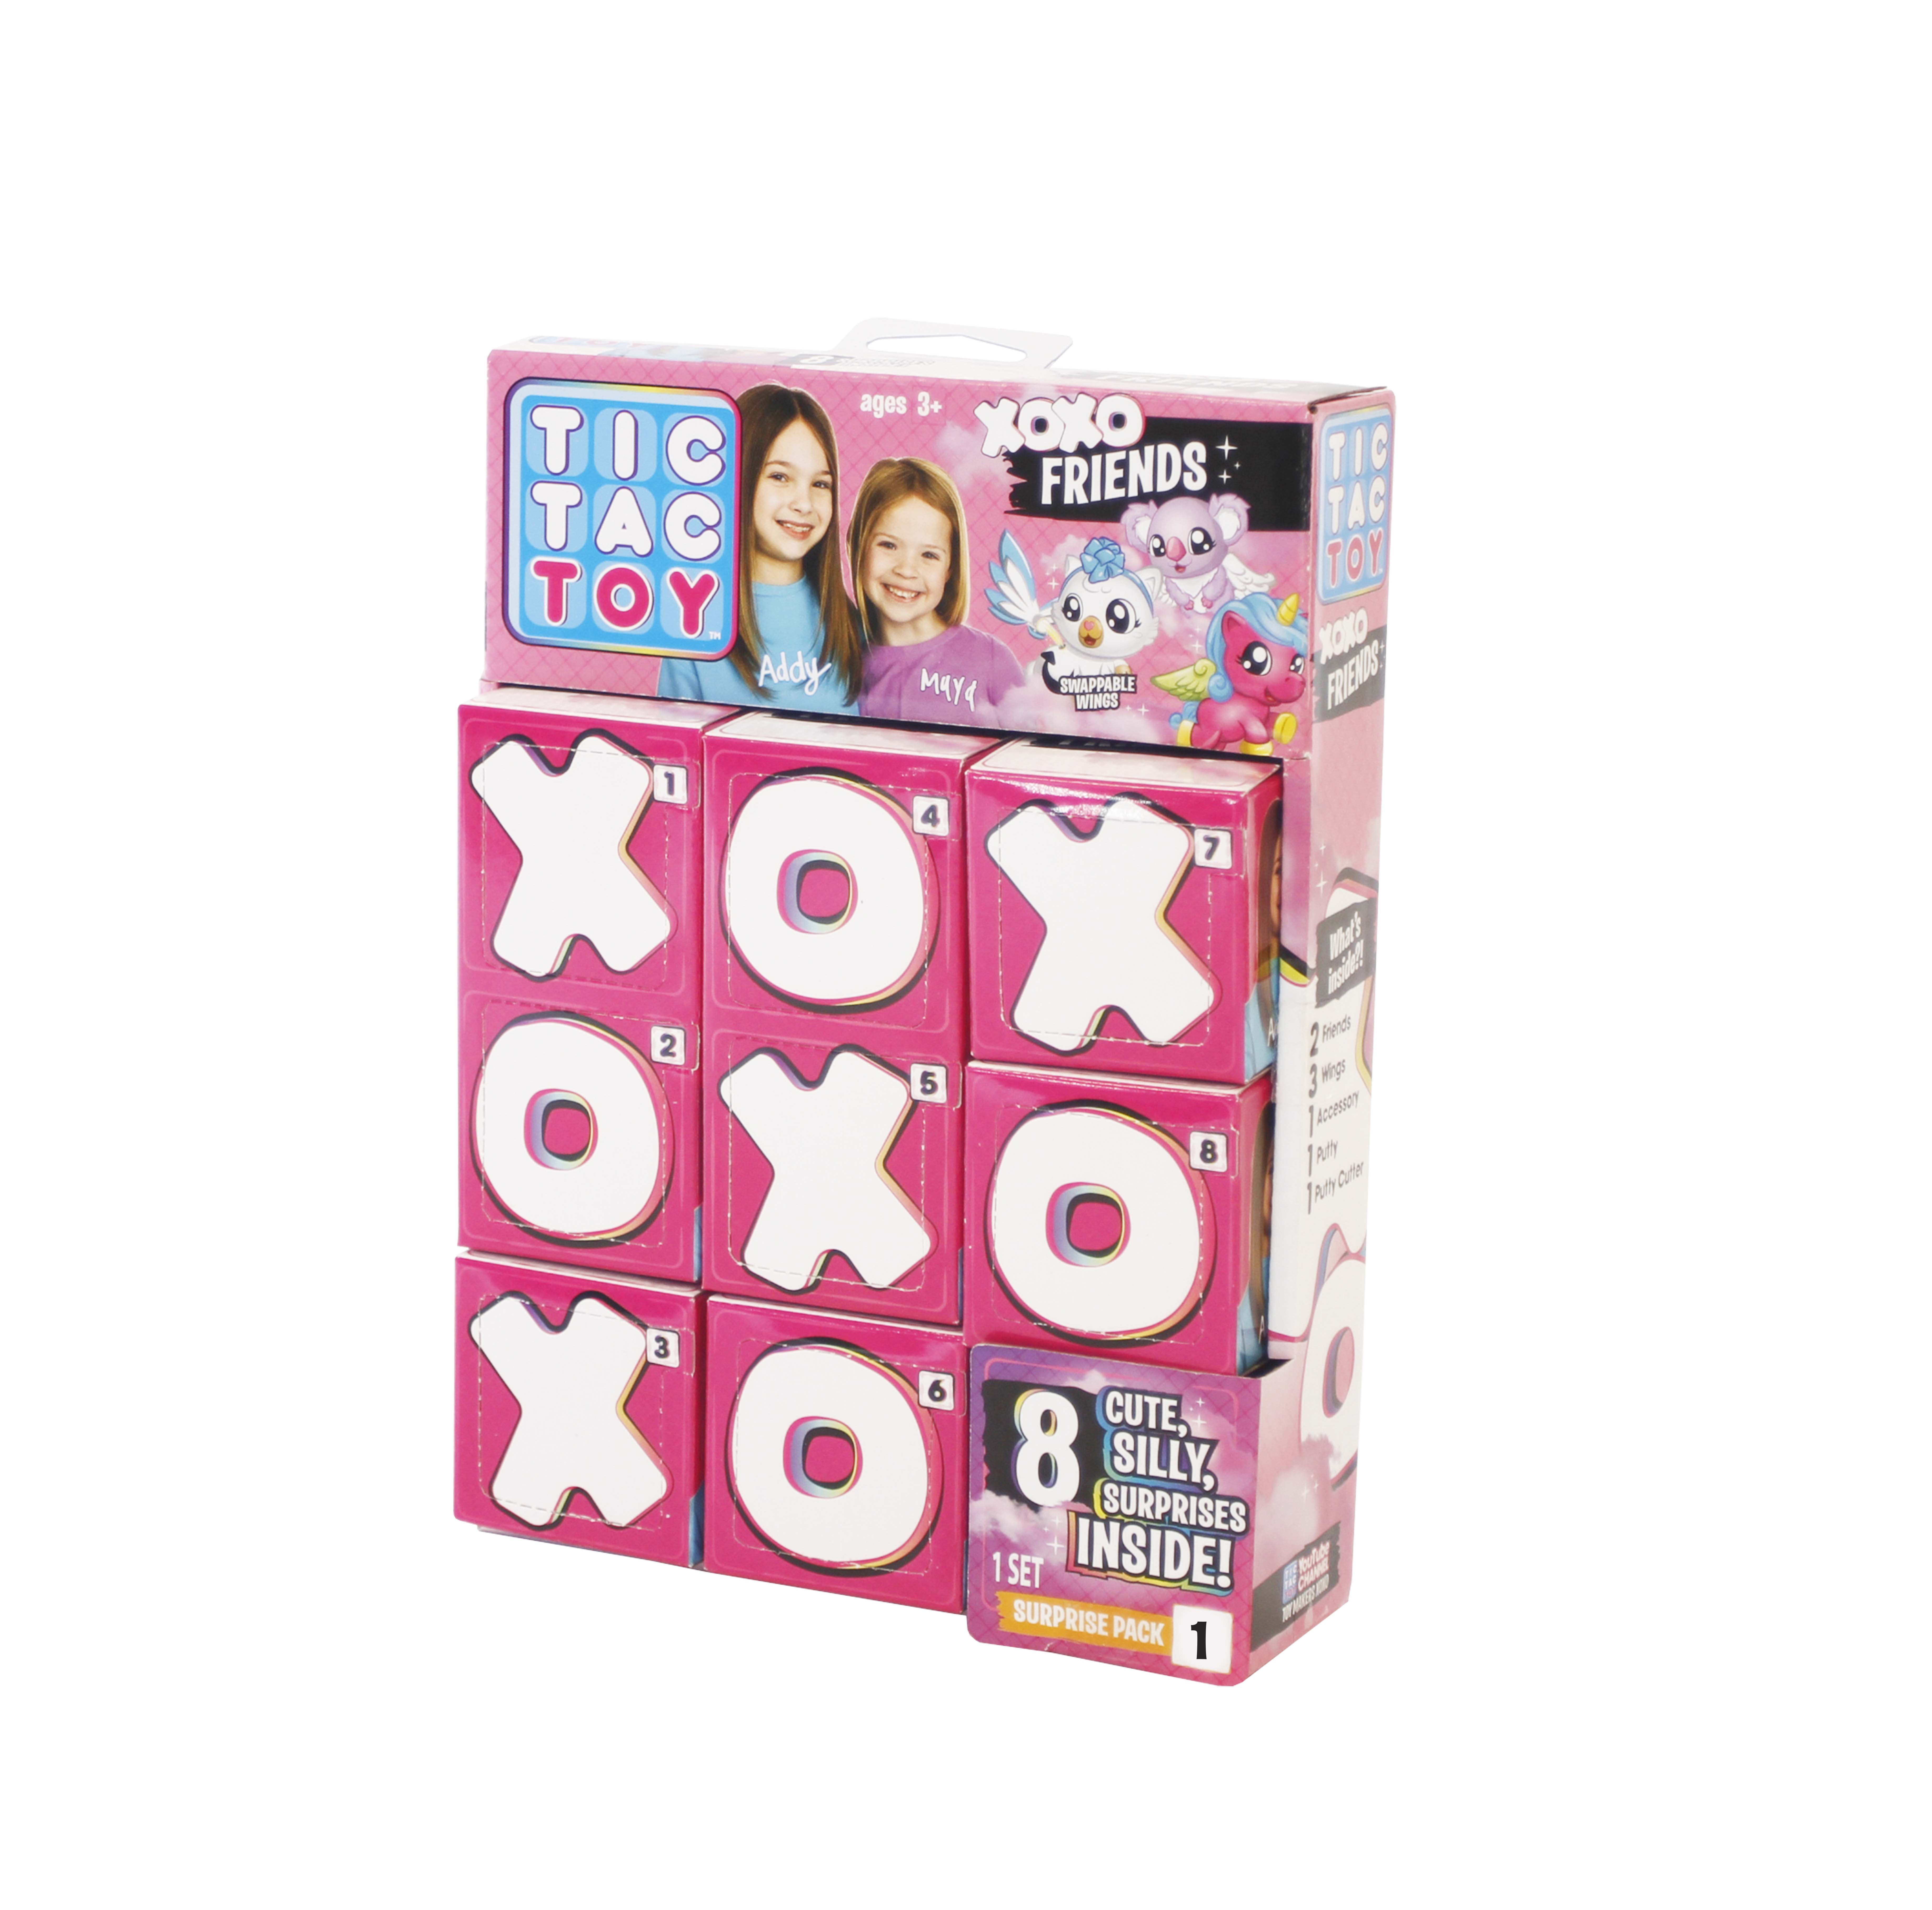 TIC TAC TOY XOXO Cupcake Surprise Great Toy & Gift for Girls Mix & Match Fun and Cute Collectibles and Accessories 